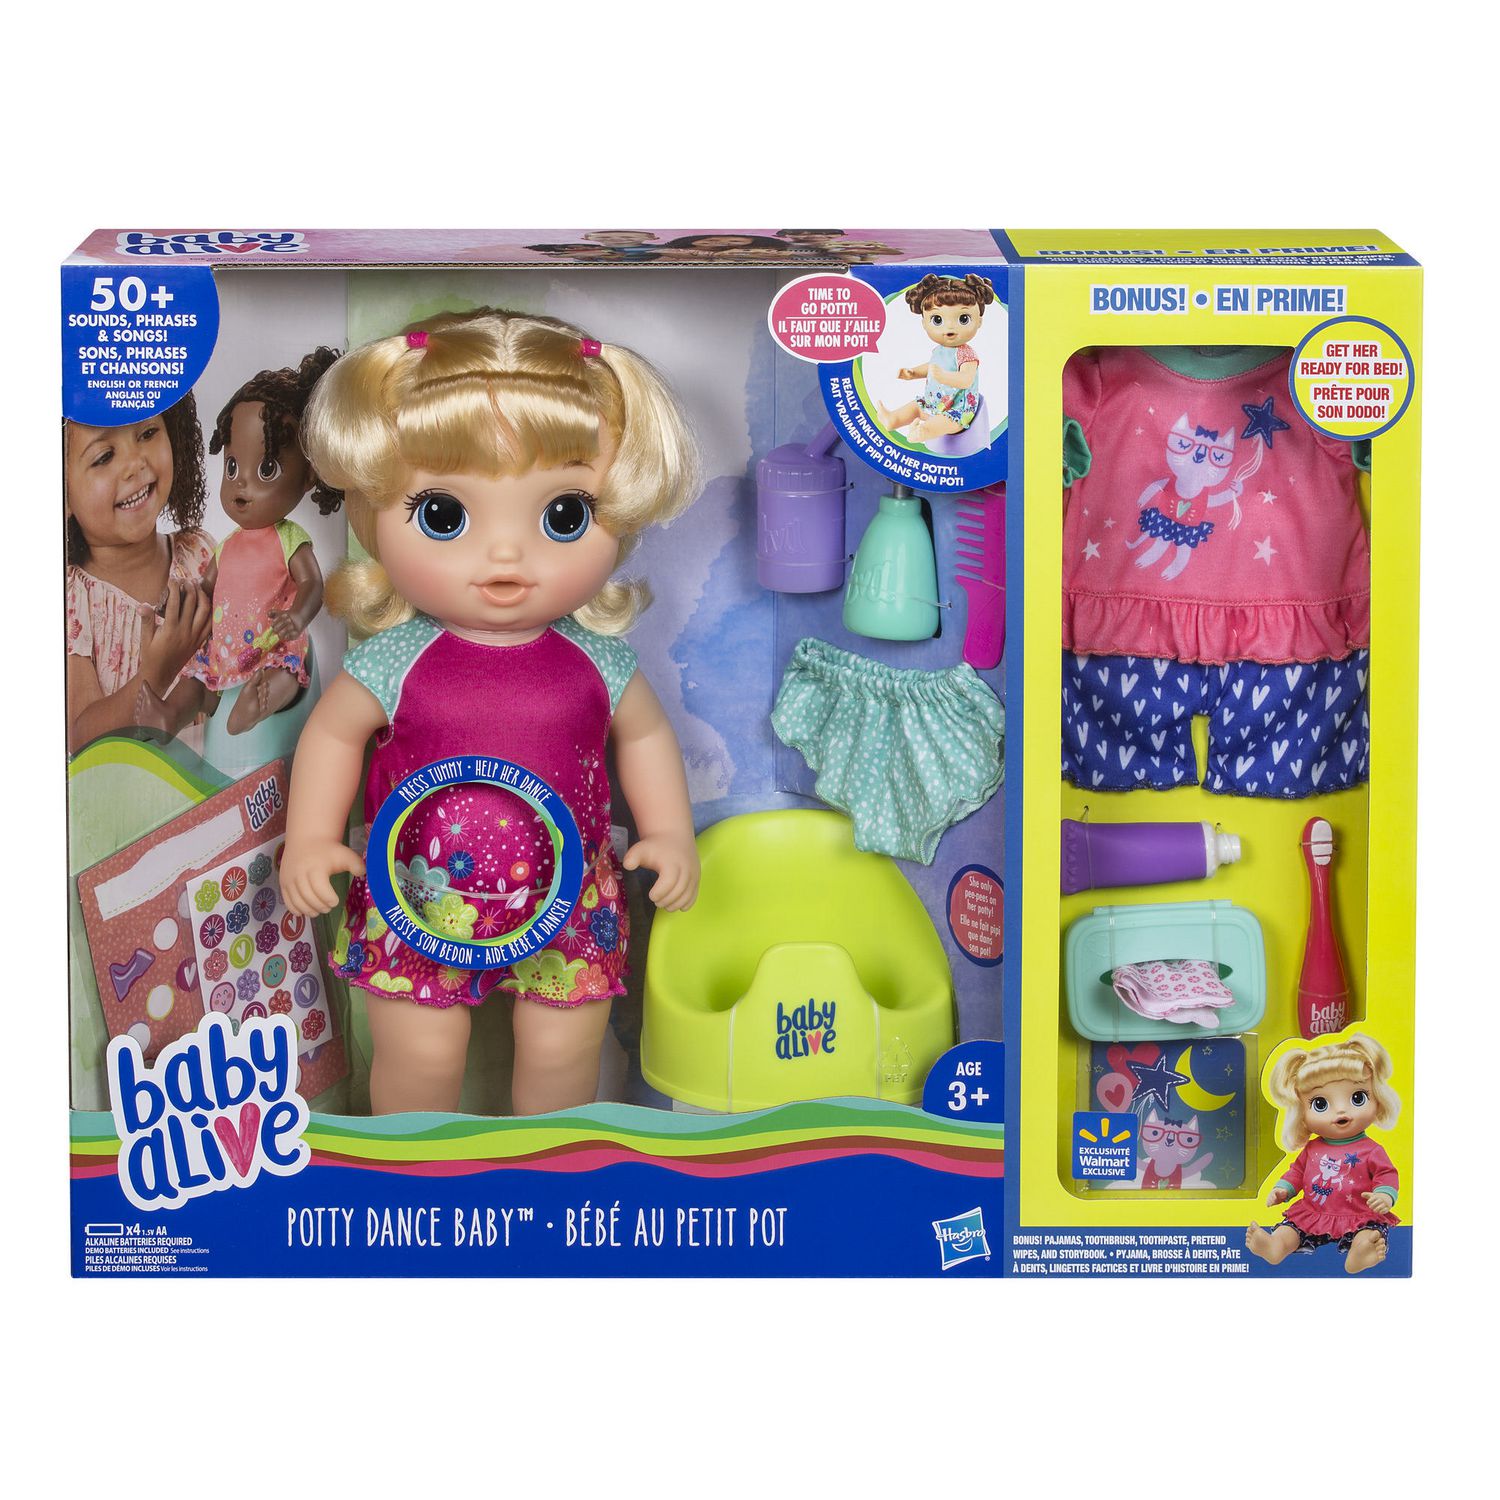 Blonde Hair Baby Alive Potty Dance Talking Baby Doll Baby Alive Dolls ...